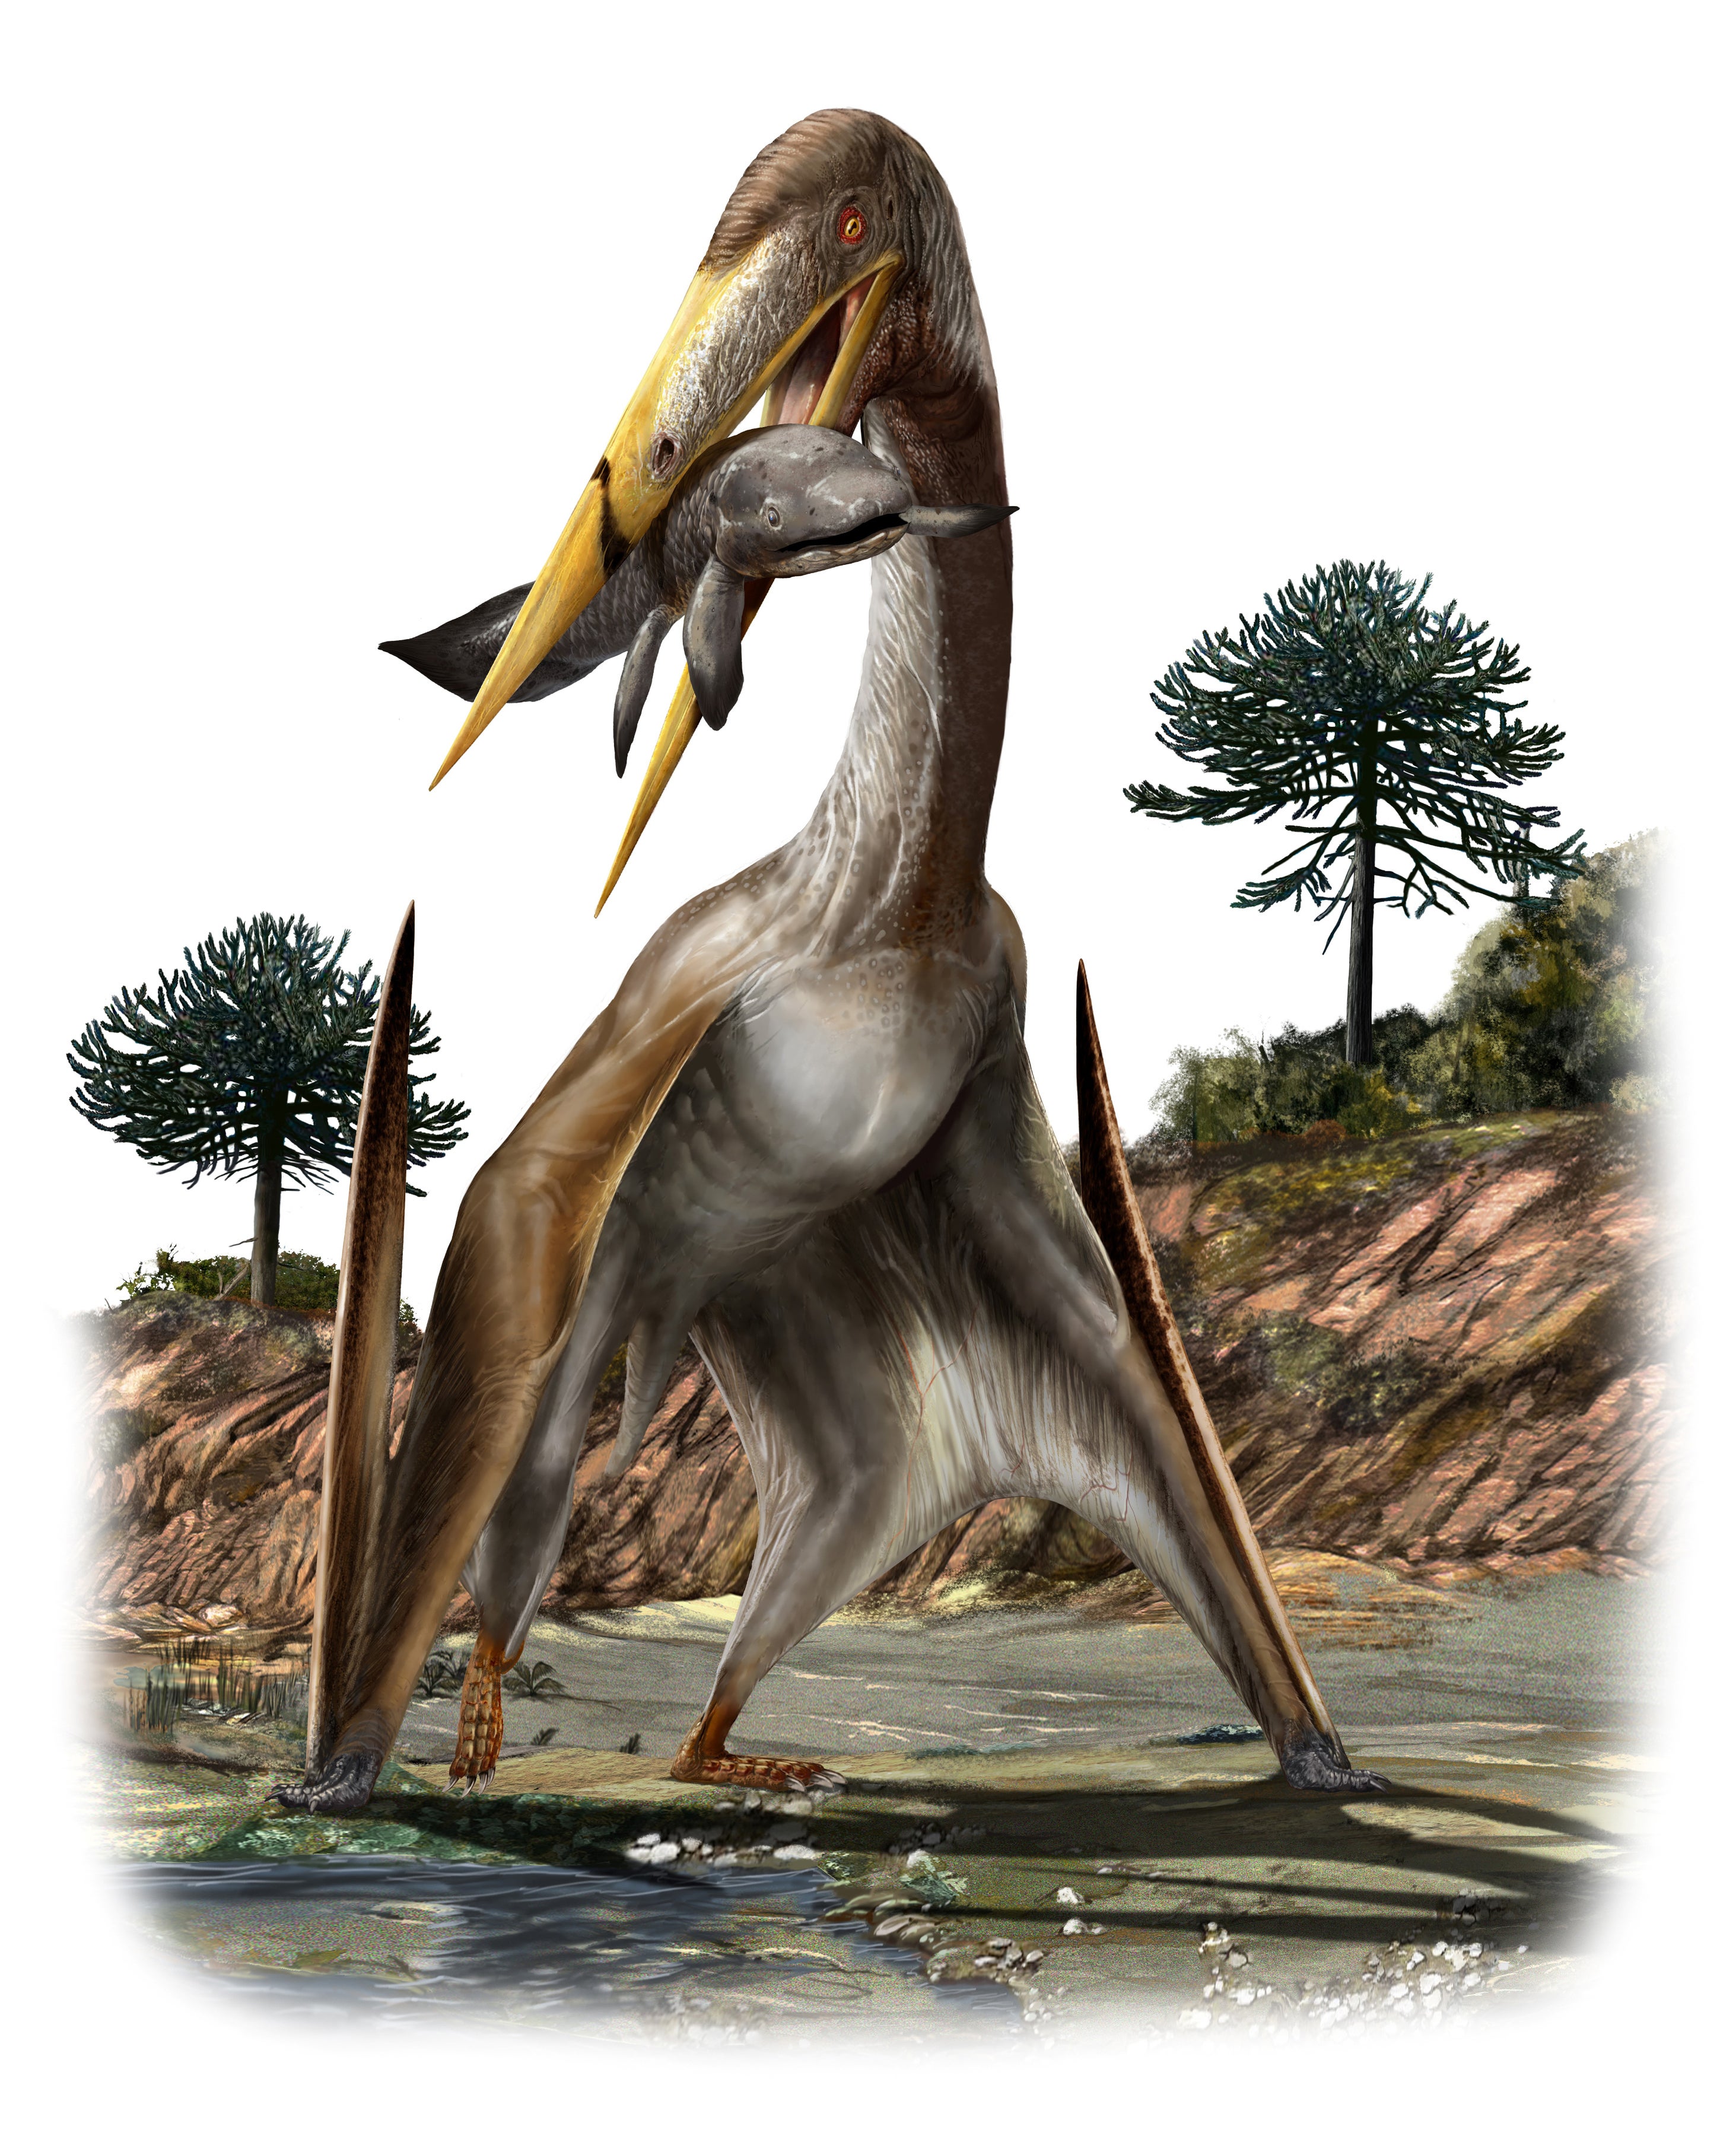 The azhdarchids’ neck structure has no parallel elsewhere in the animal kingdom